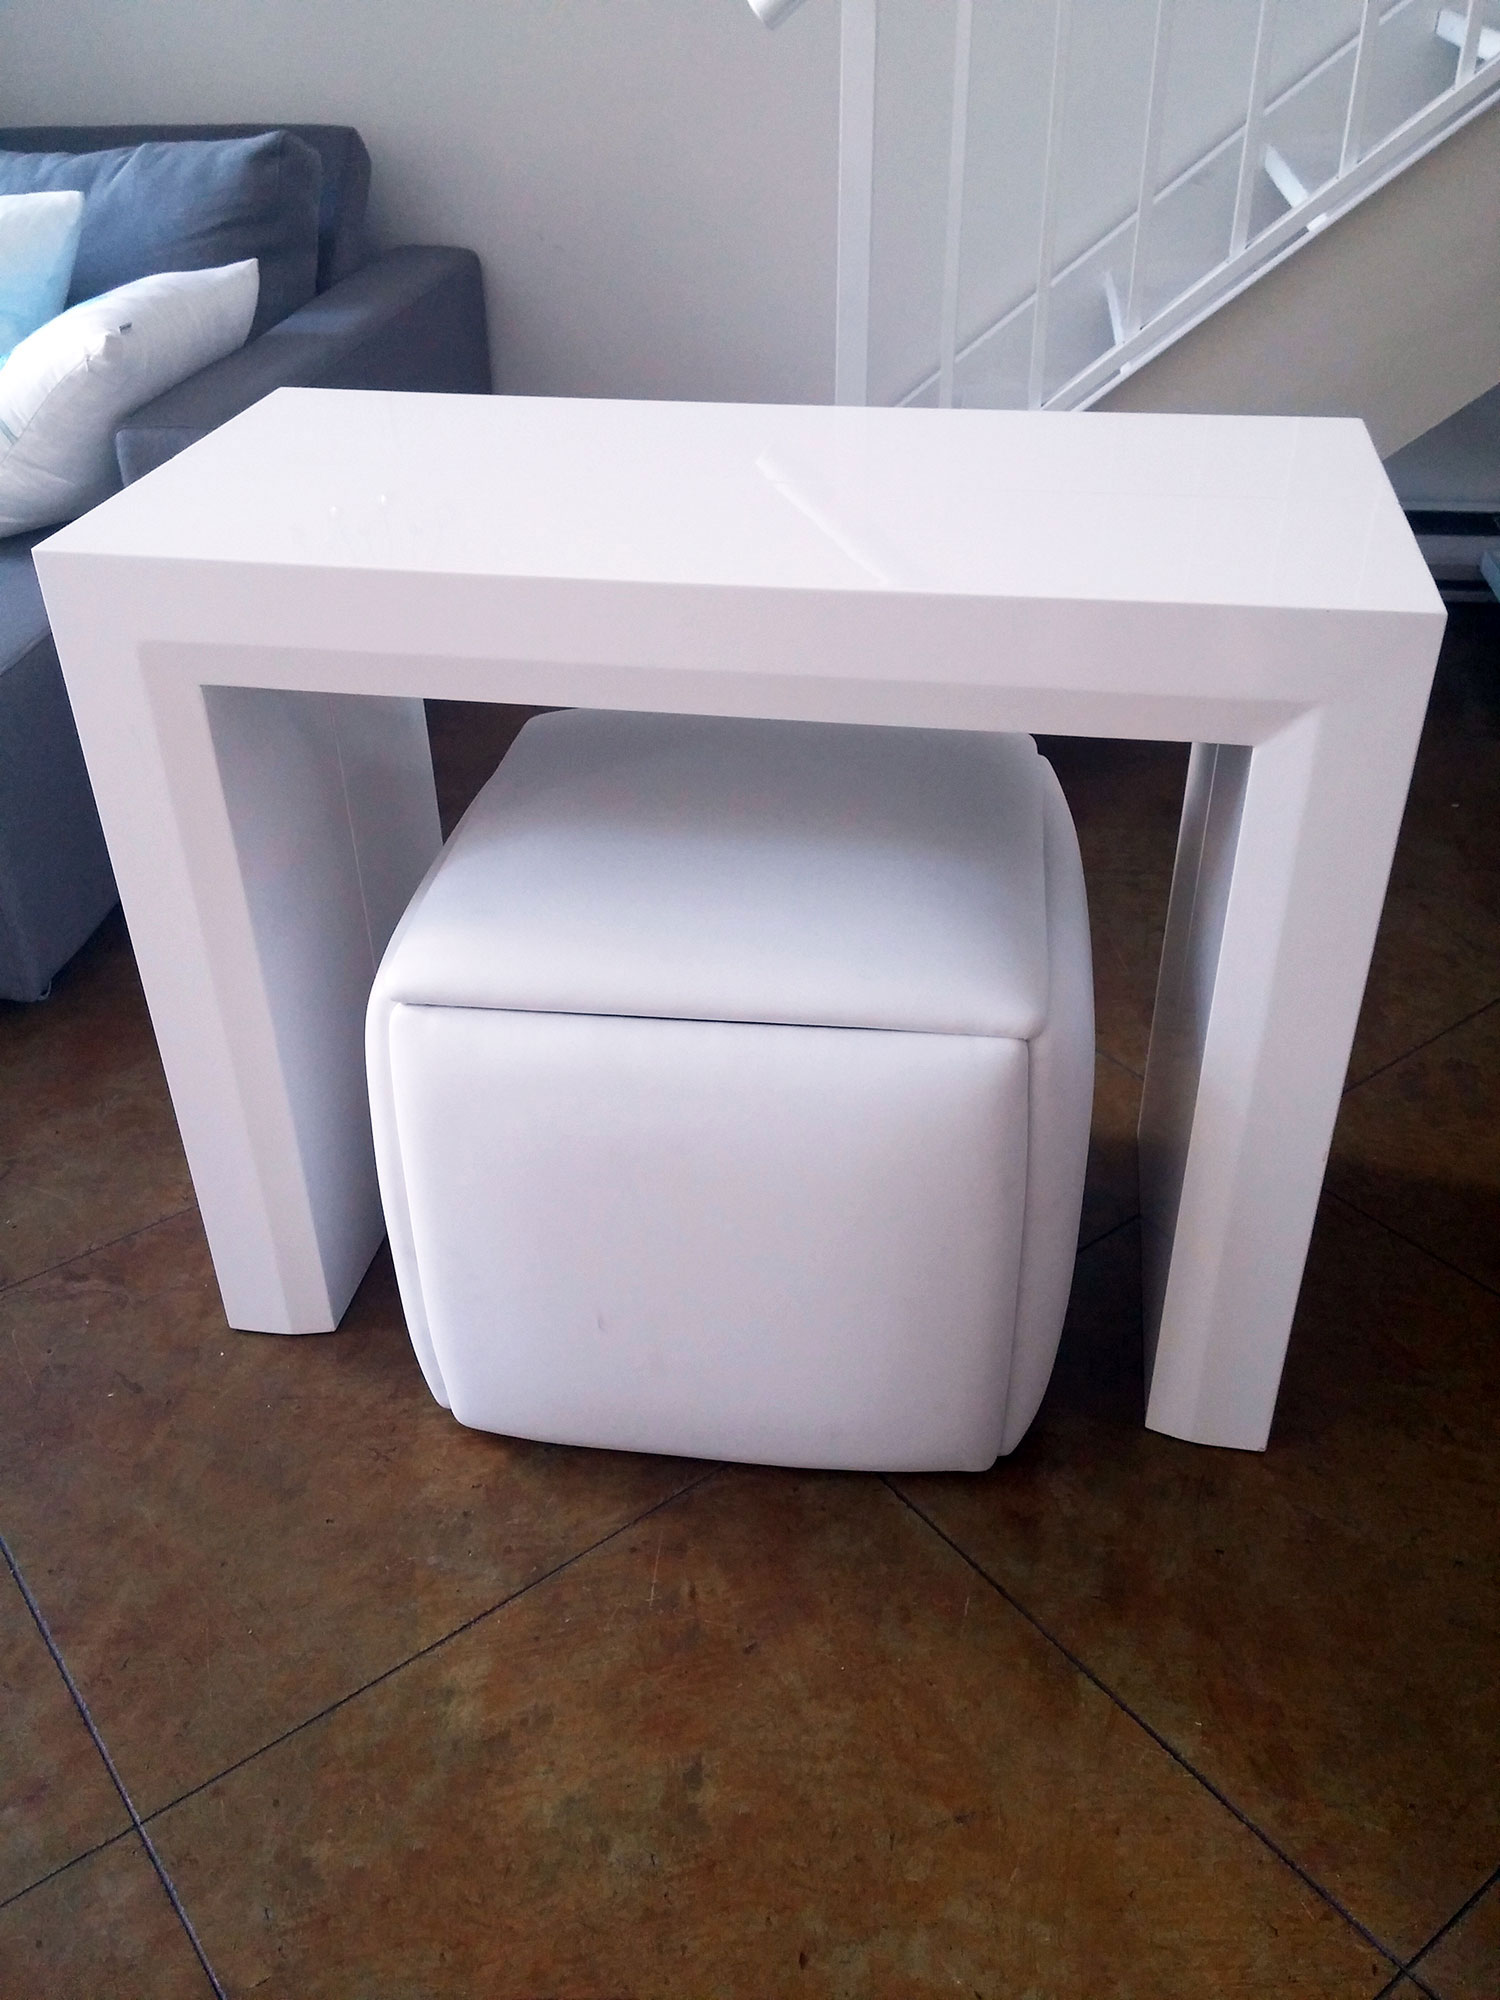 Companion Cube 5 Hidden Seats Ottoman Expand Furniture Folding Tables Smarter Wall Beds Space Savers